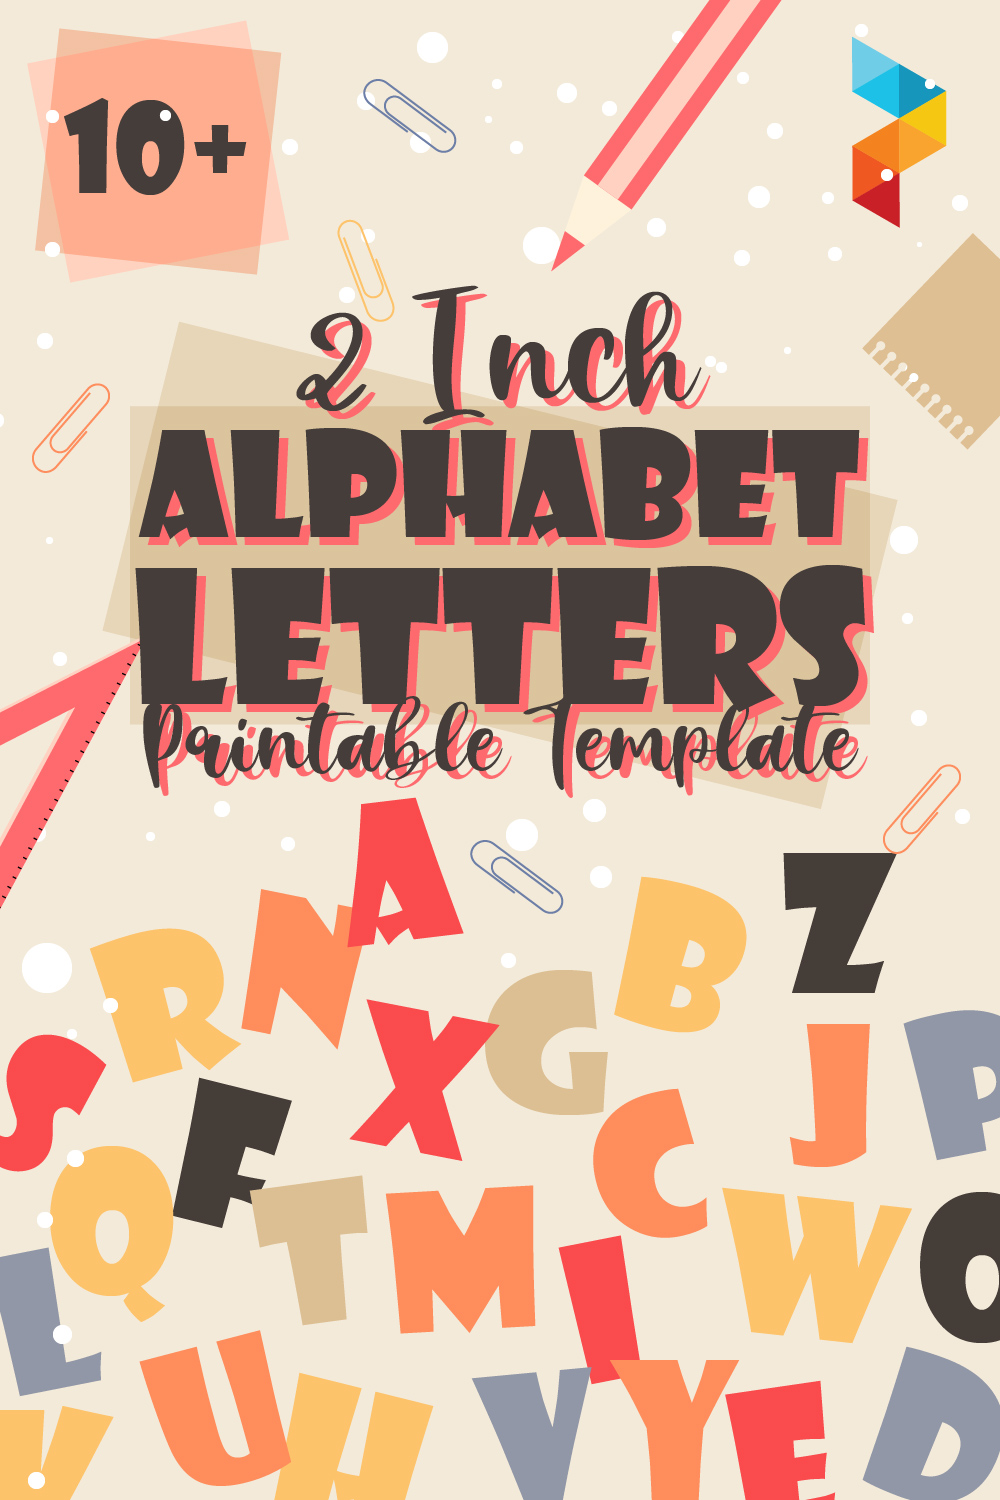 2 Inch Alphabet Letters Template